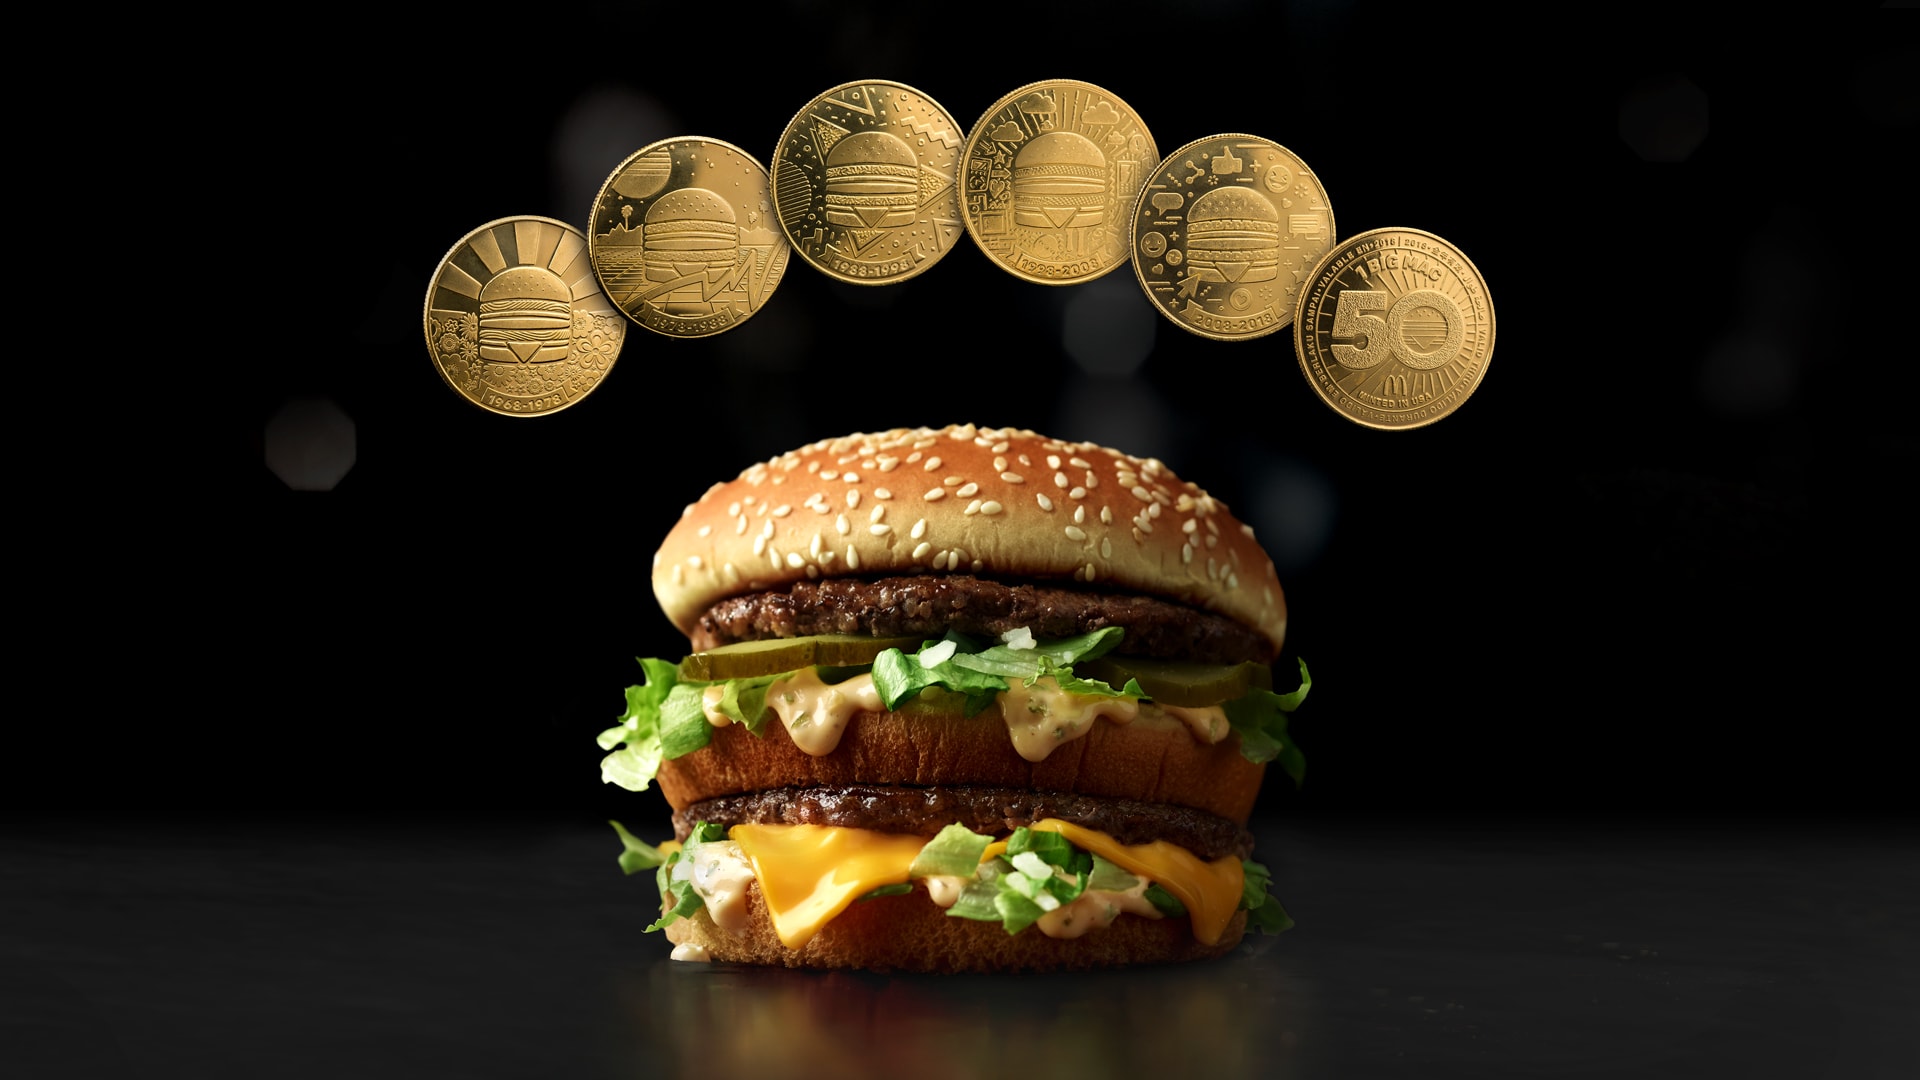 Six gold coins float above a burger